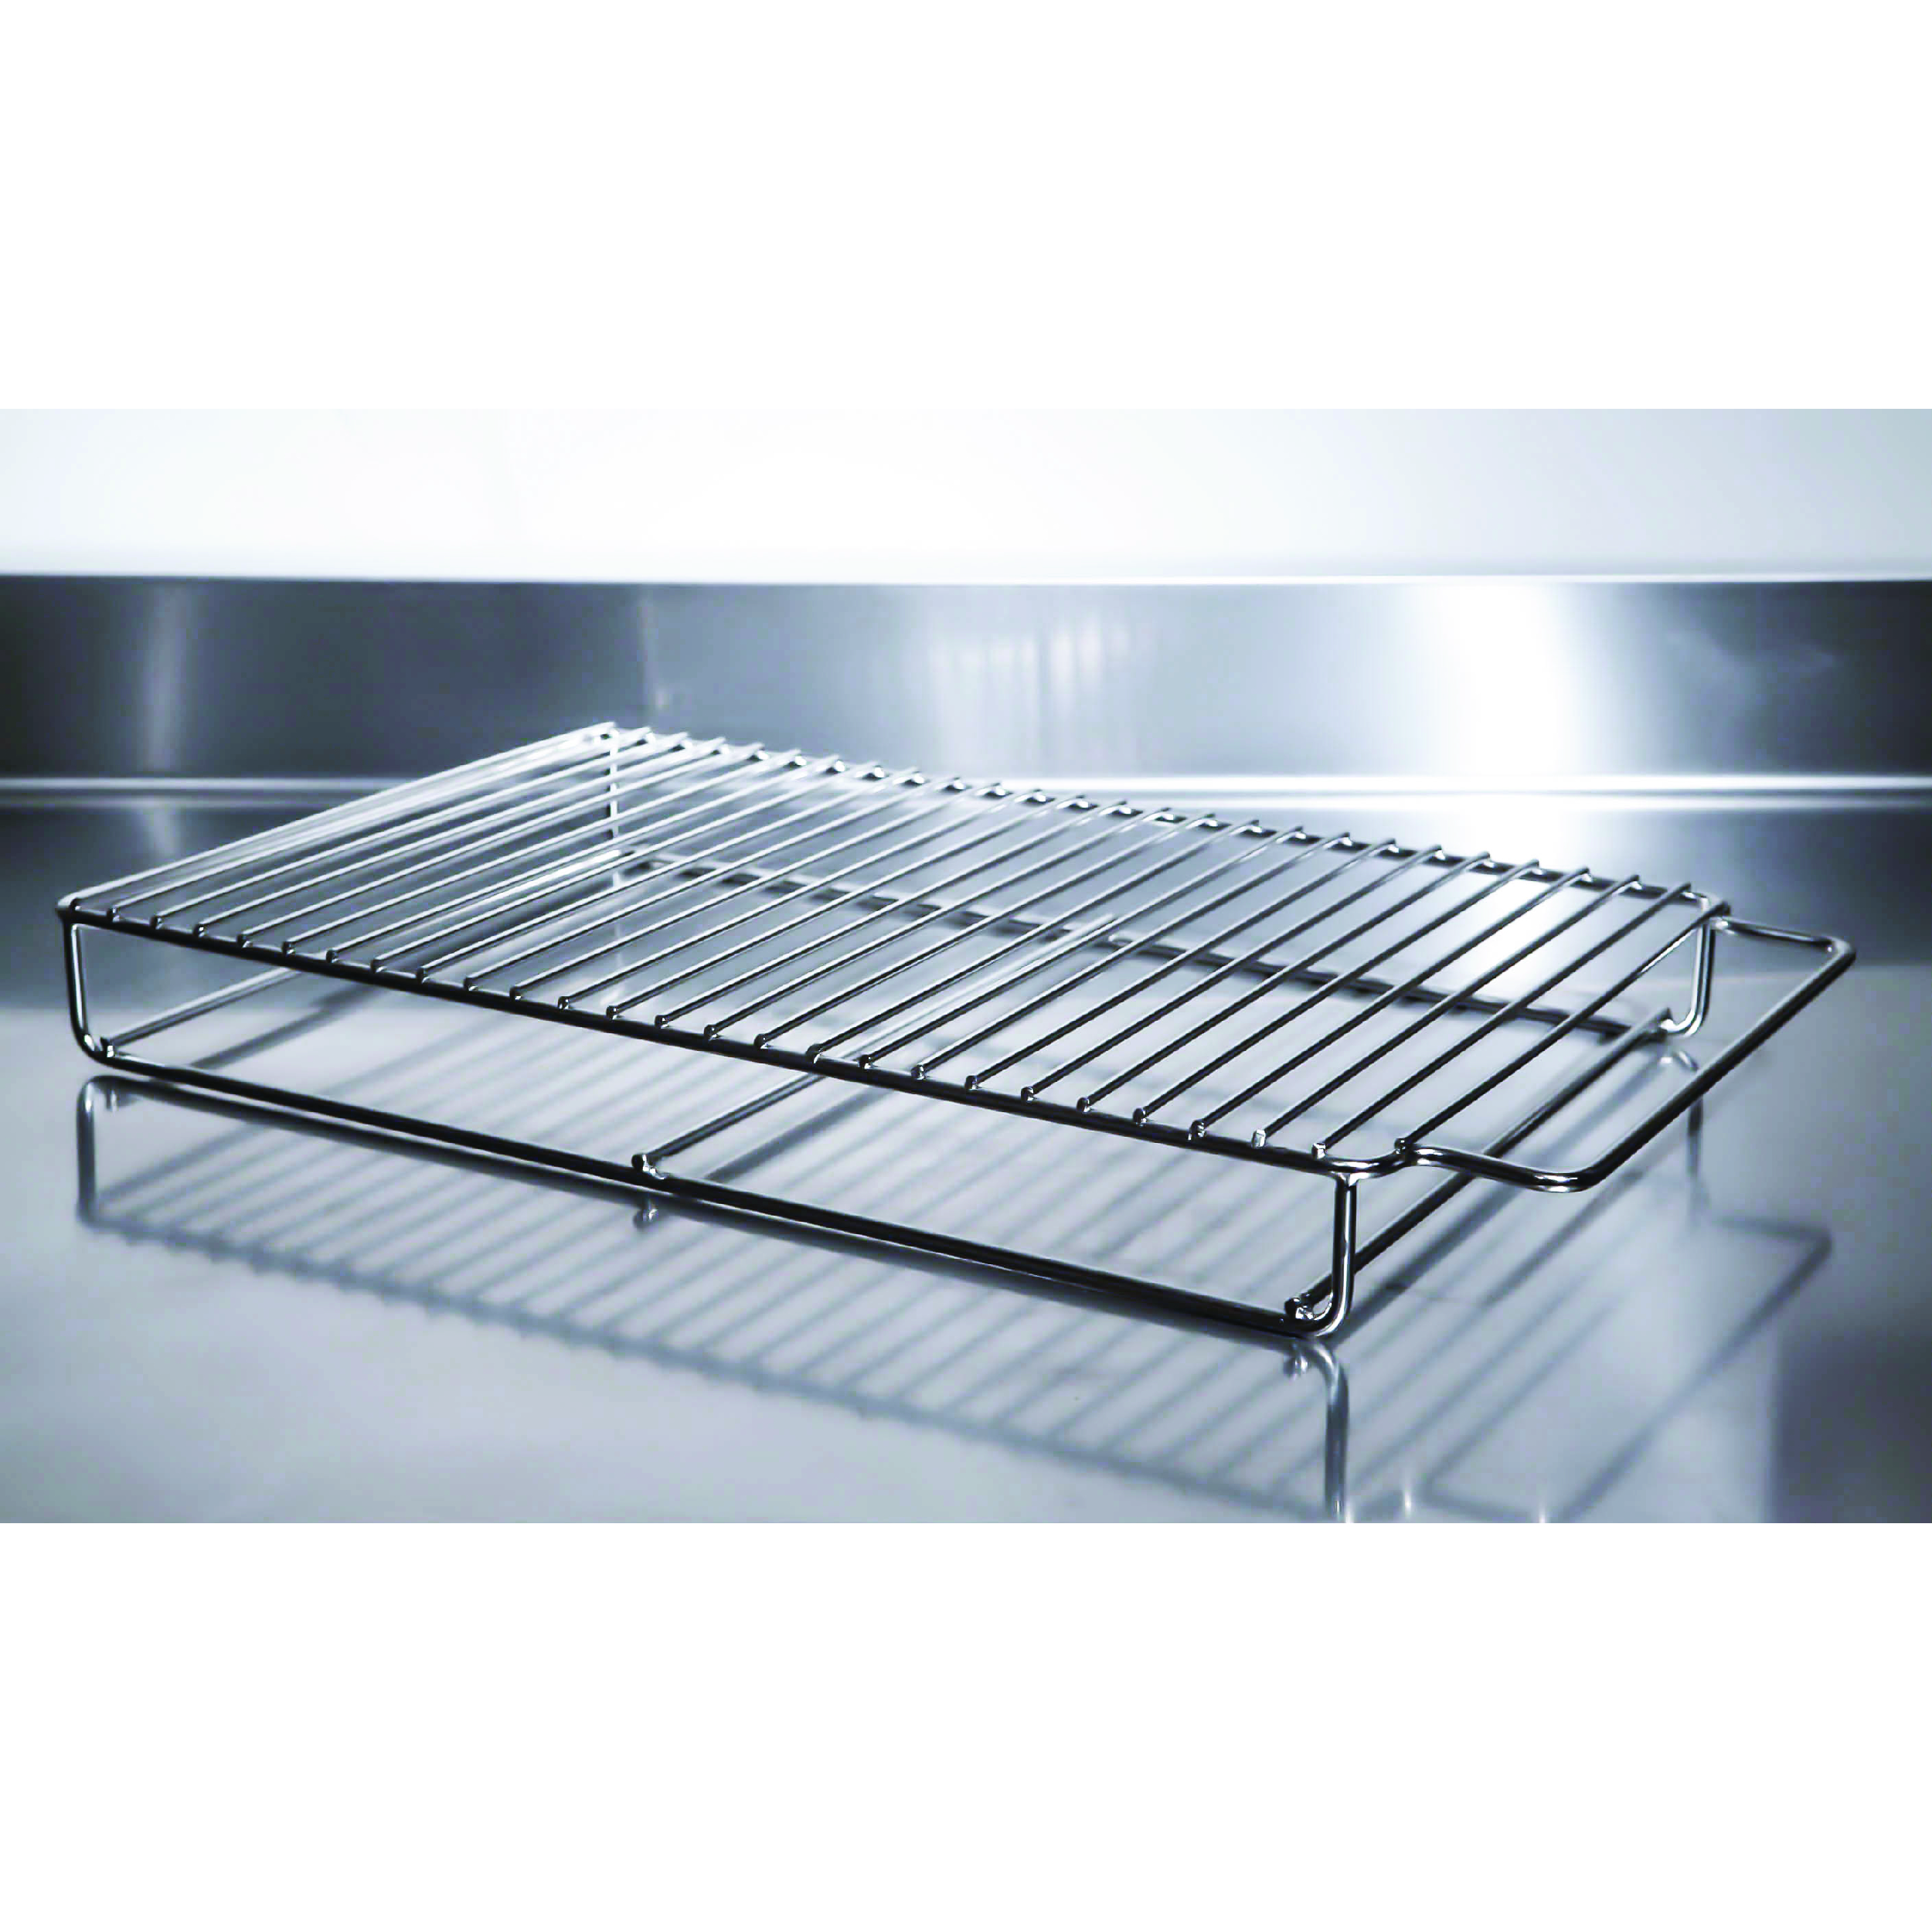 Tuscan Grille Stainless Steel Tuscan Grill | Ovens & BBQs